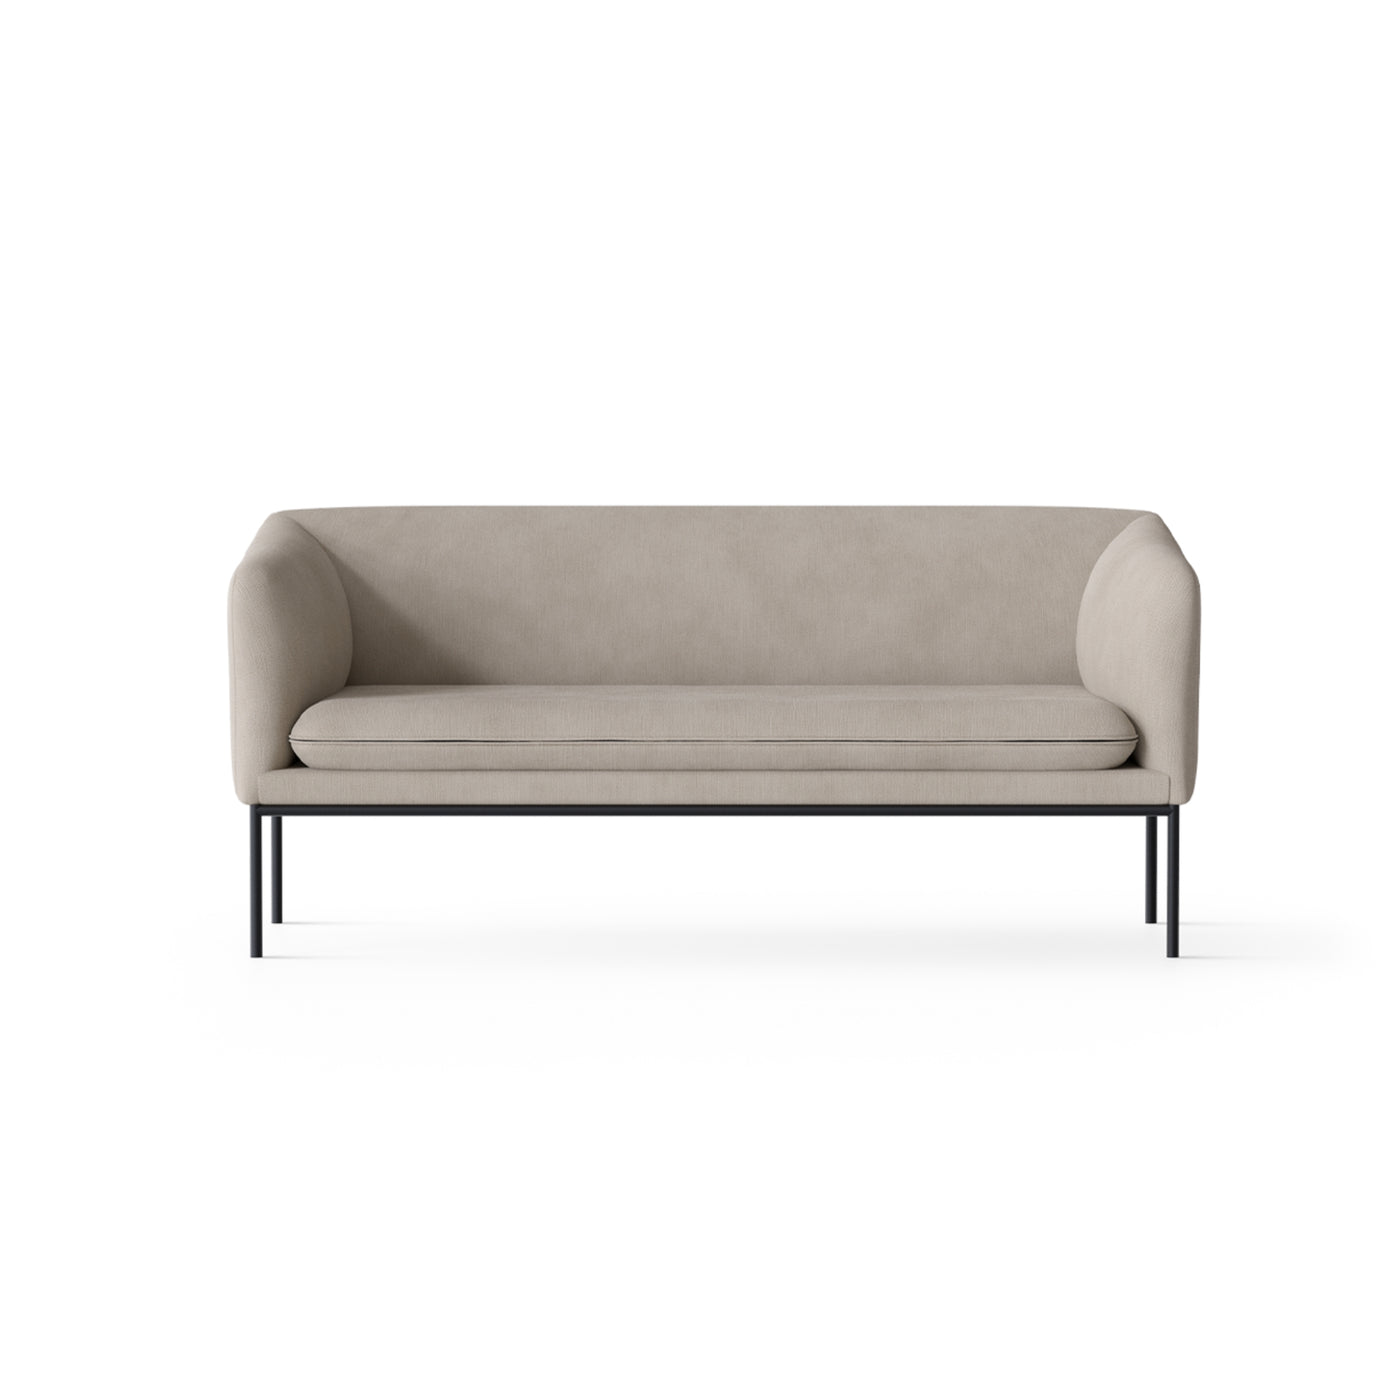 ferm LIVING Turn 2 seater sofa. Made to order at someday designs. #colour_linara-sand